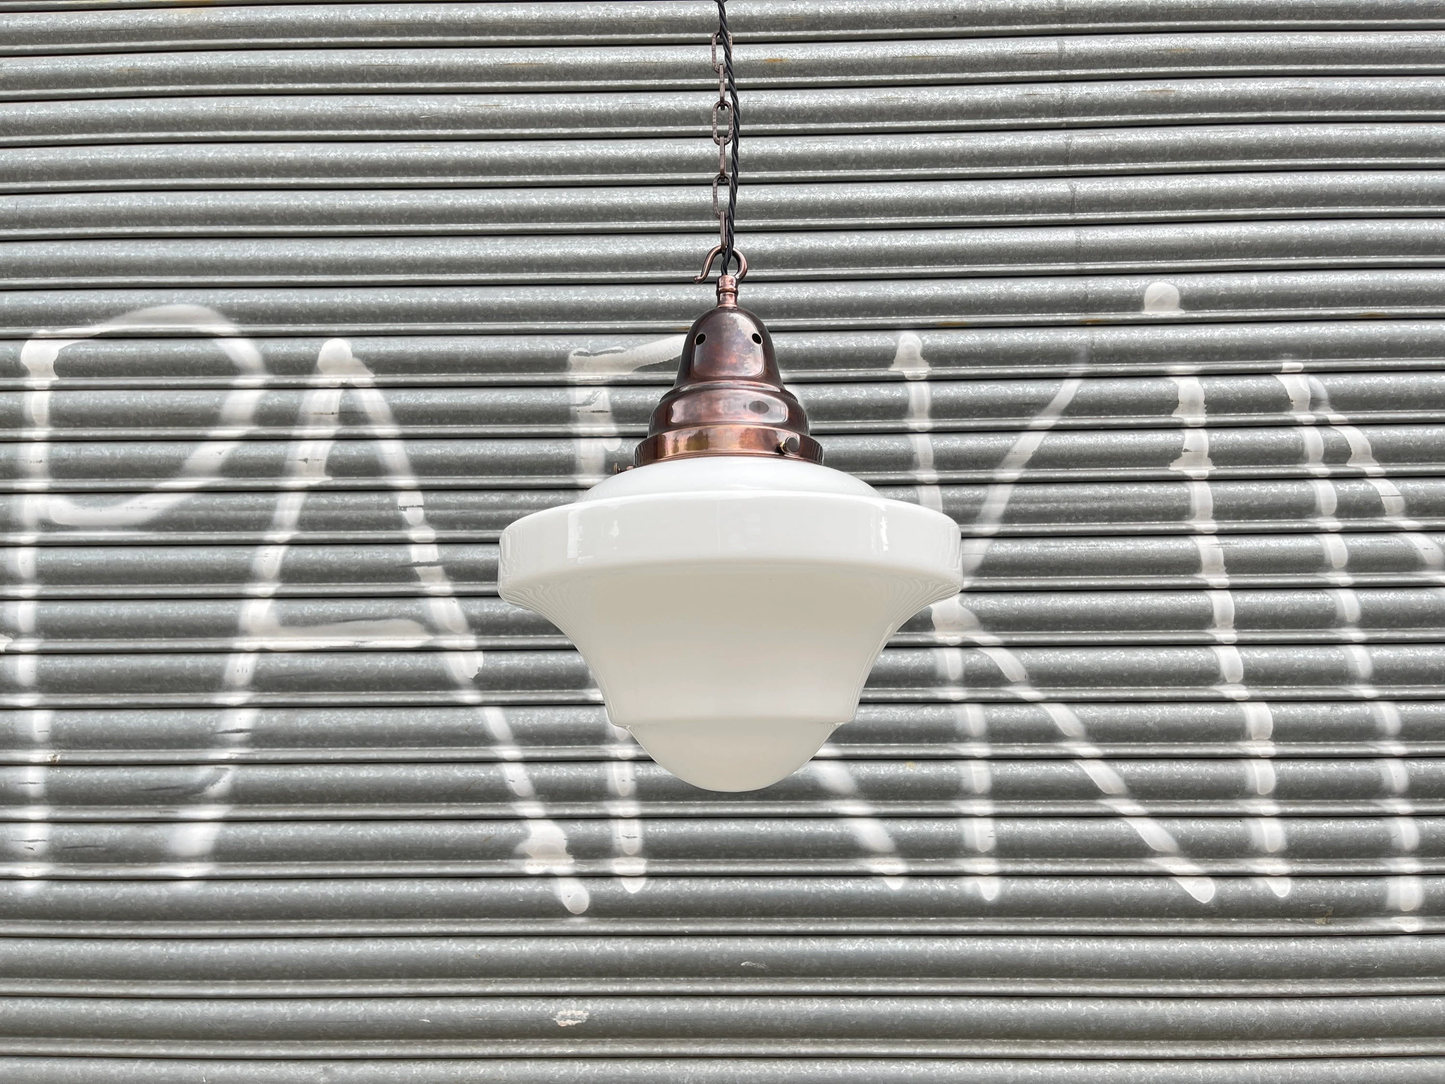 1930s Opaline Pendant Light By Benjamin Electric Manufacturing Company